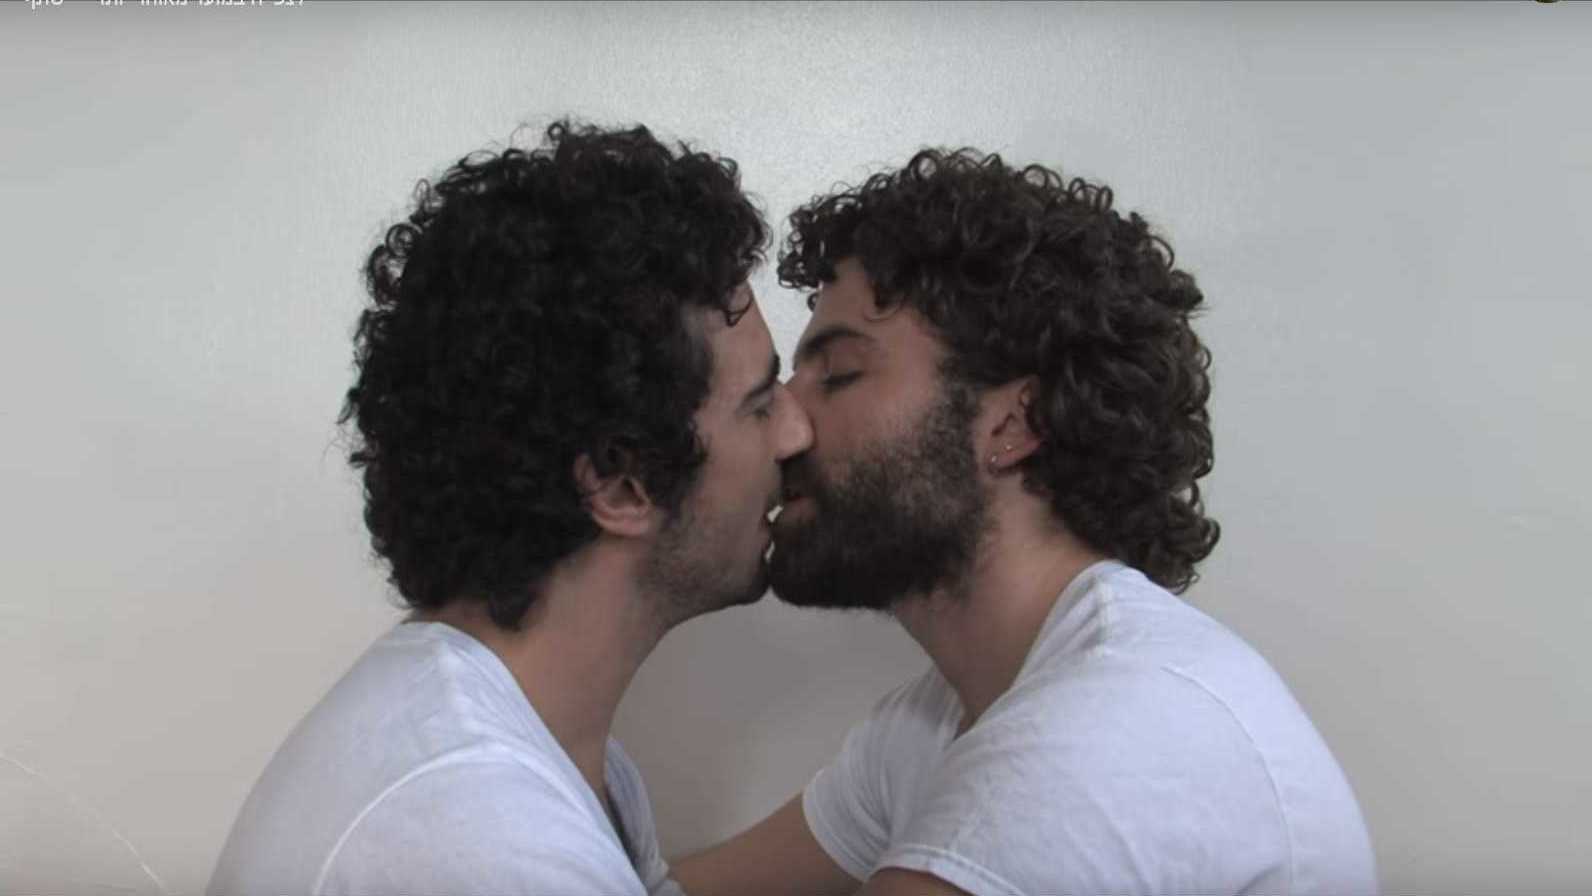 Video art by the artist Idan Biton that is 1:24:24 long and consists of a kiss between two men